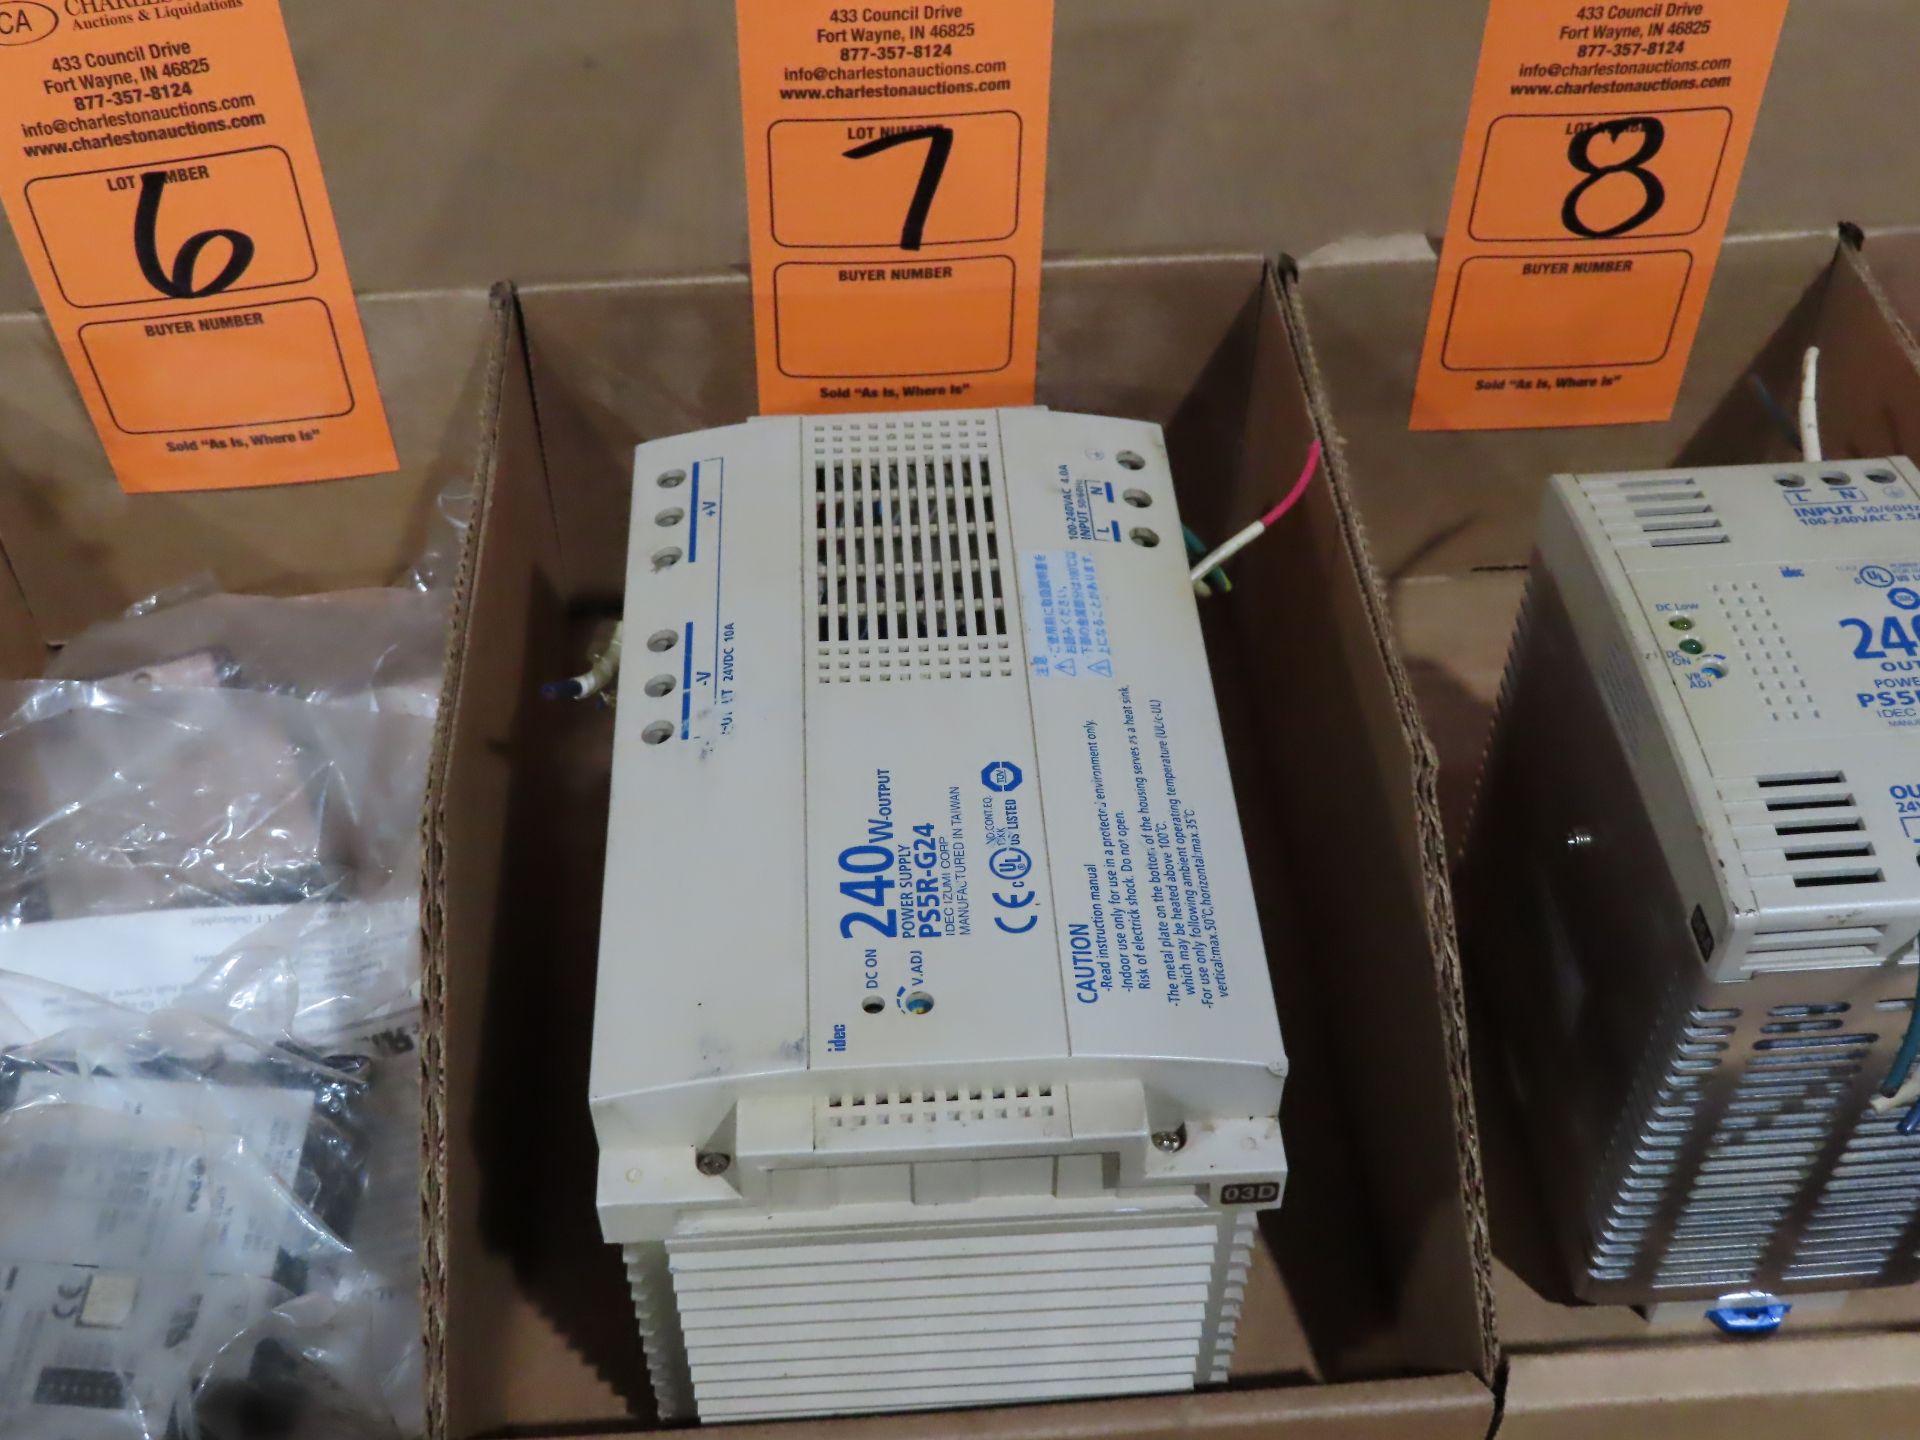 Idec power supply model PS5R-G24, used, as always with Brolyn LLC auctions, all lots can be picked